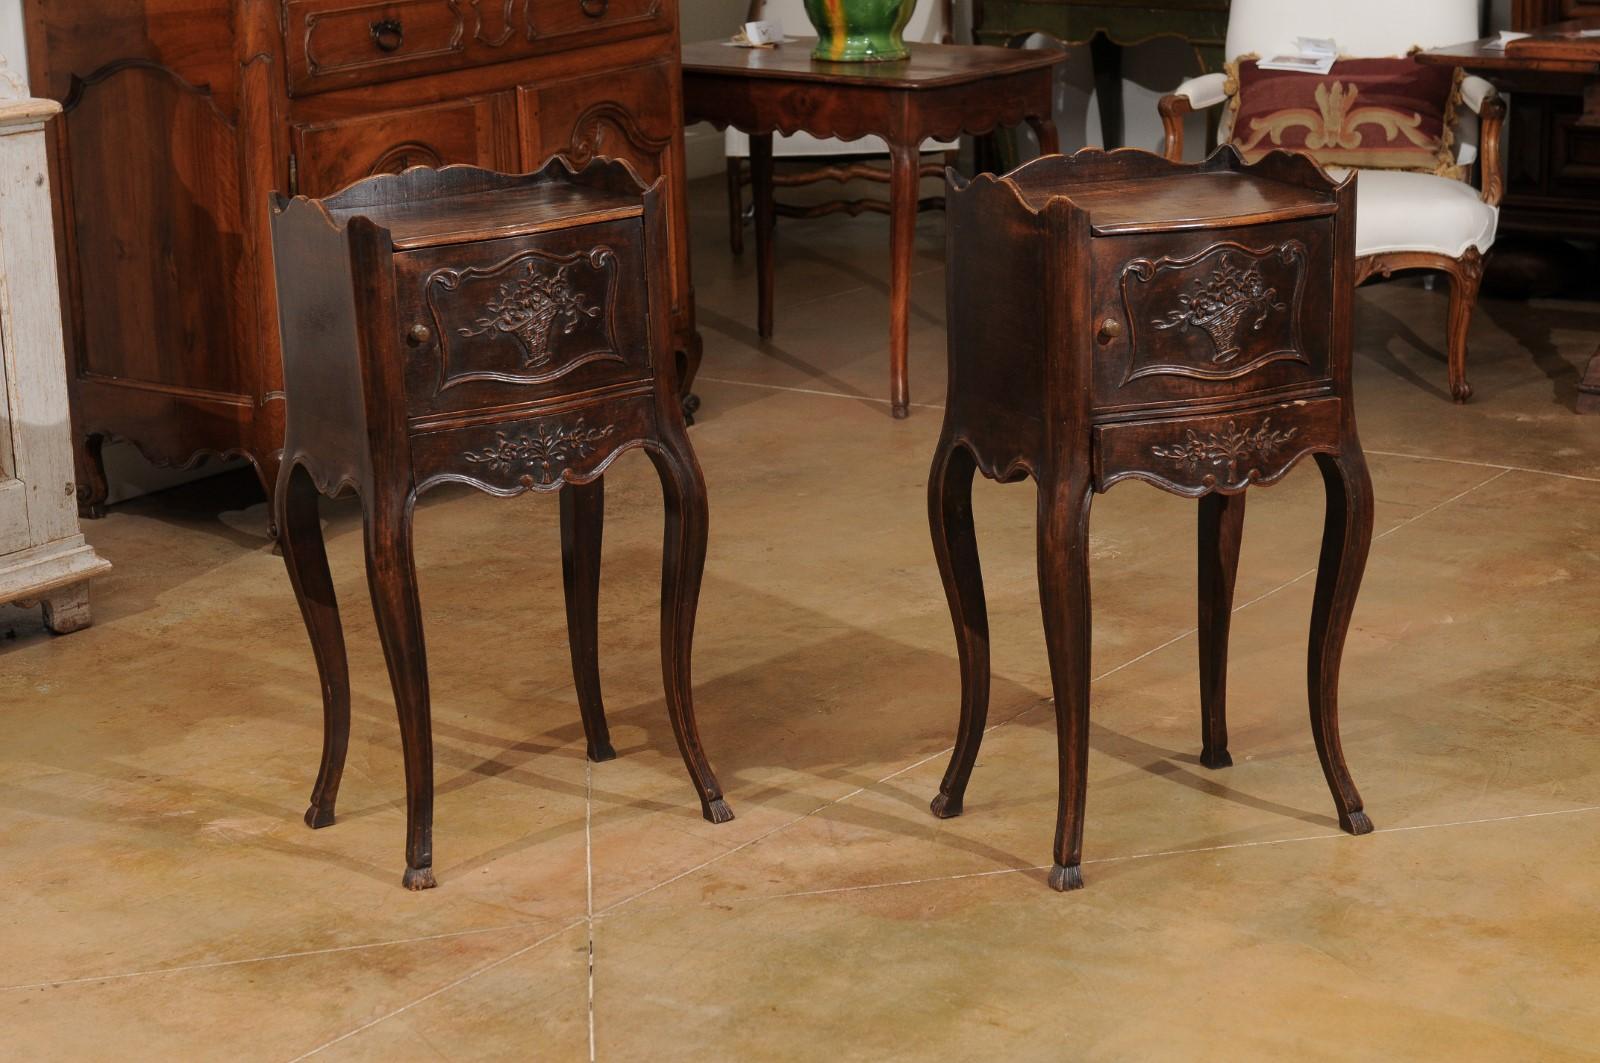 Pair of 19th Century French Carved Walnut Bedside Tables with Doors and Drawers 1